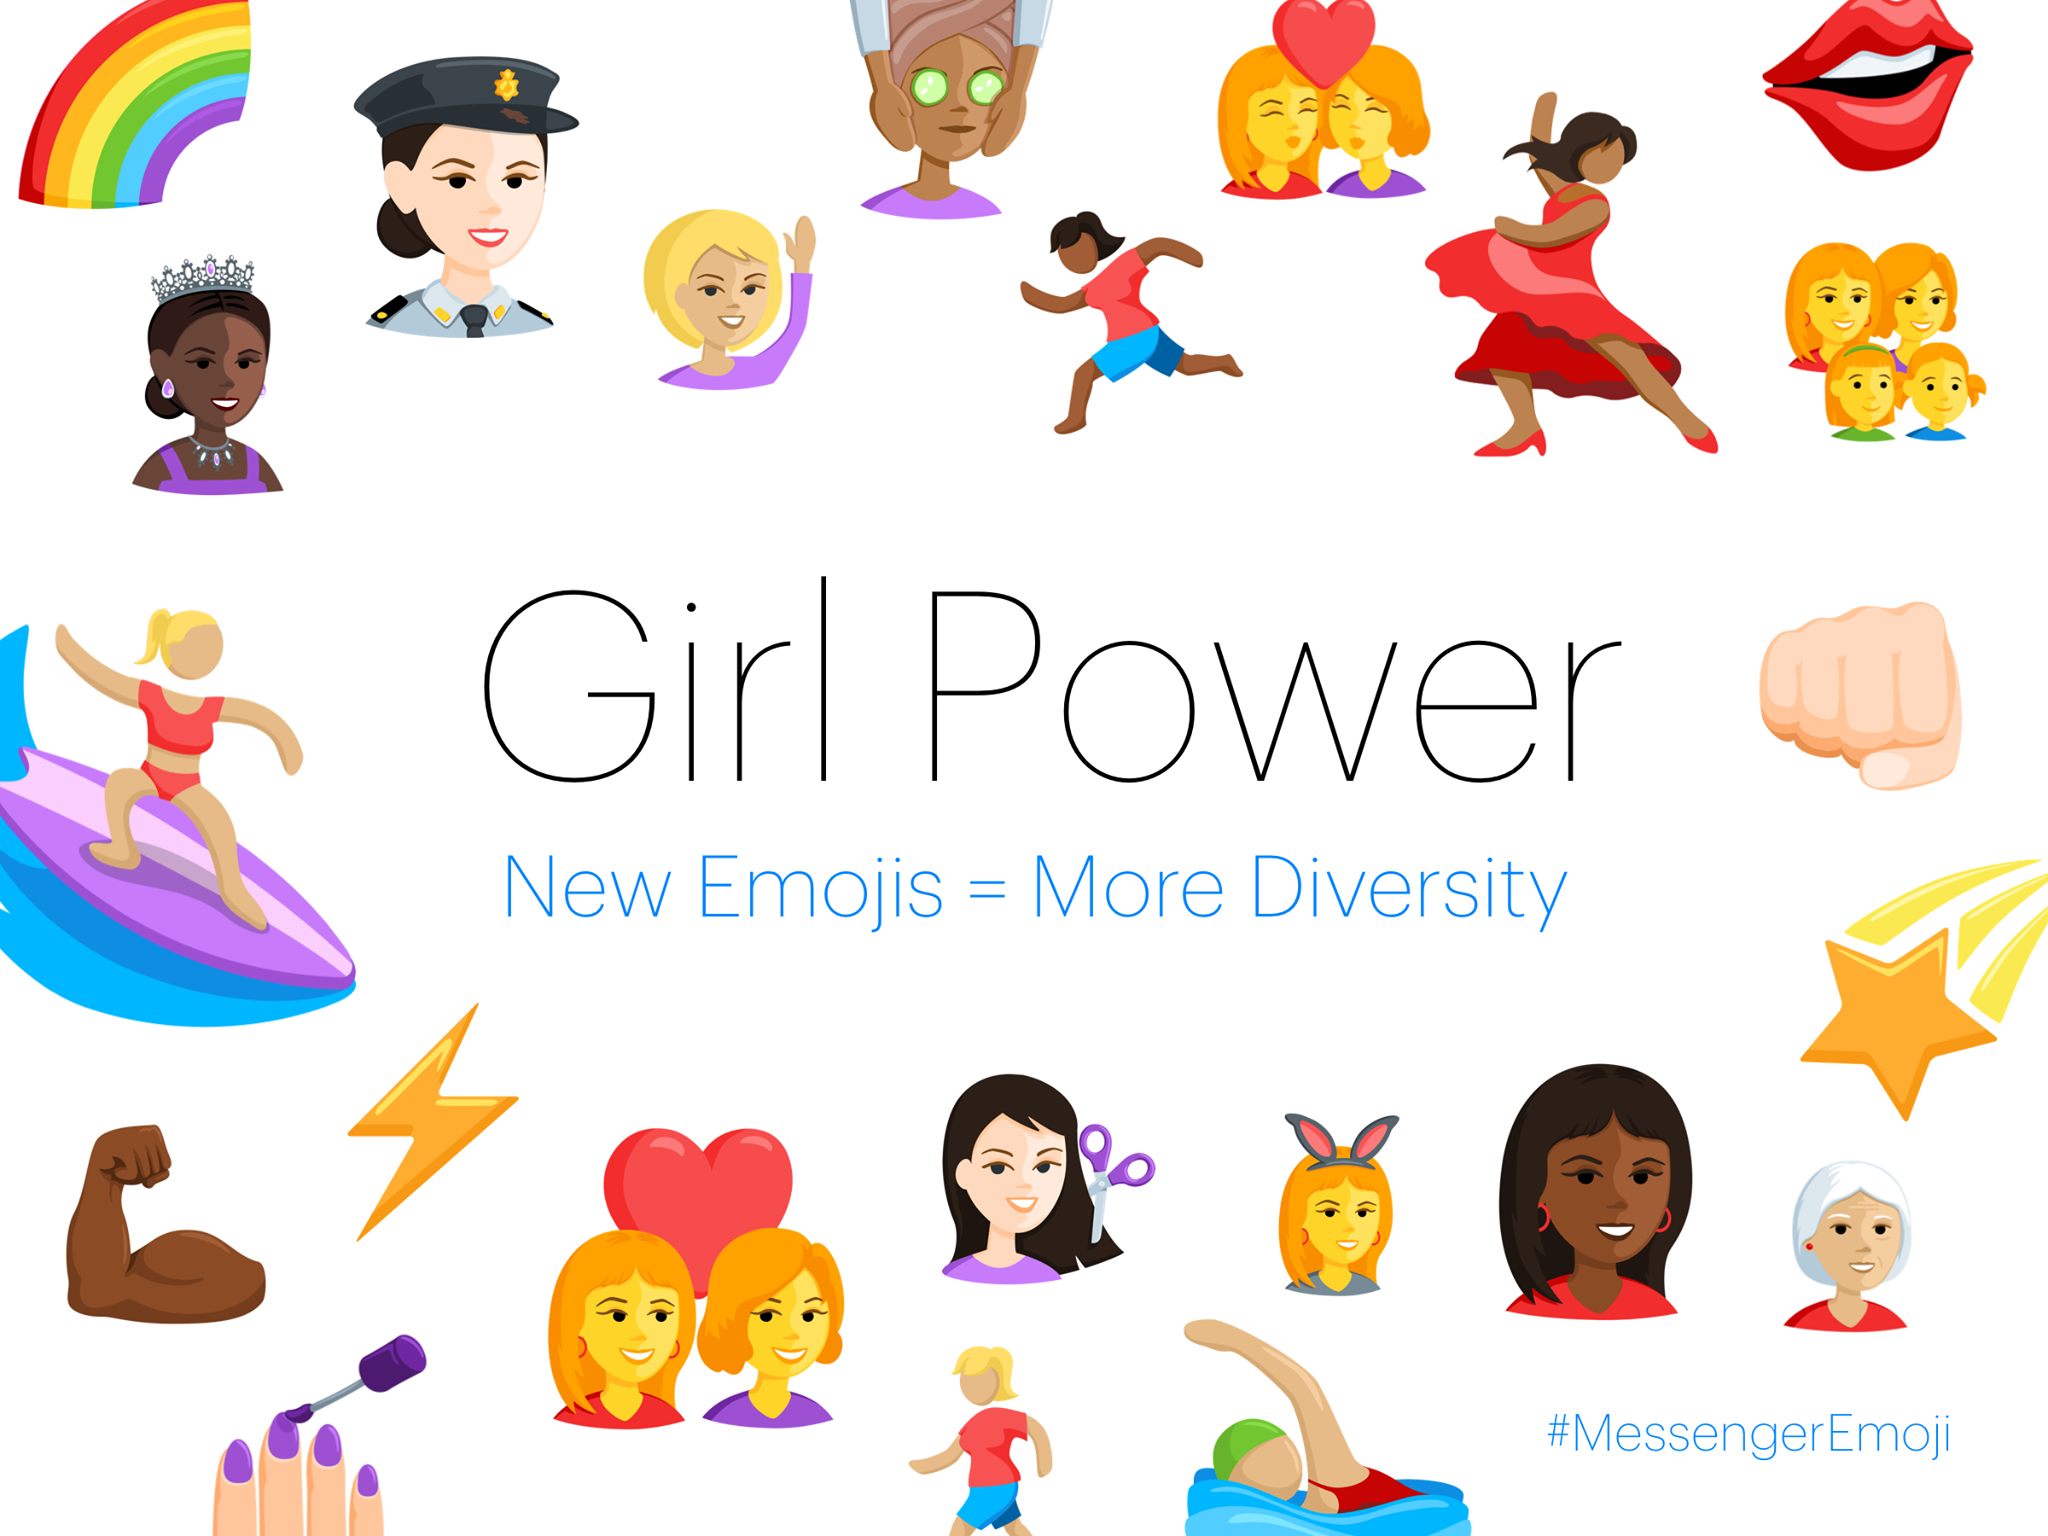 Facebook Is Making Their Own Less Sexist Emoji